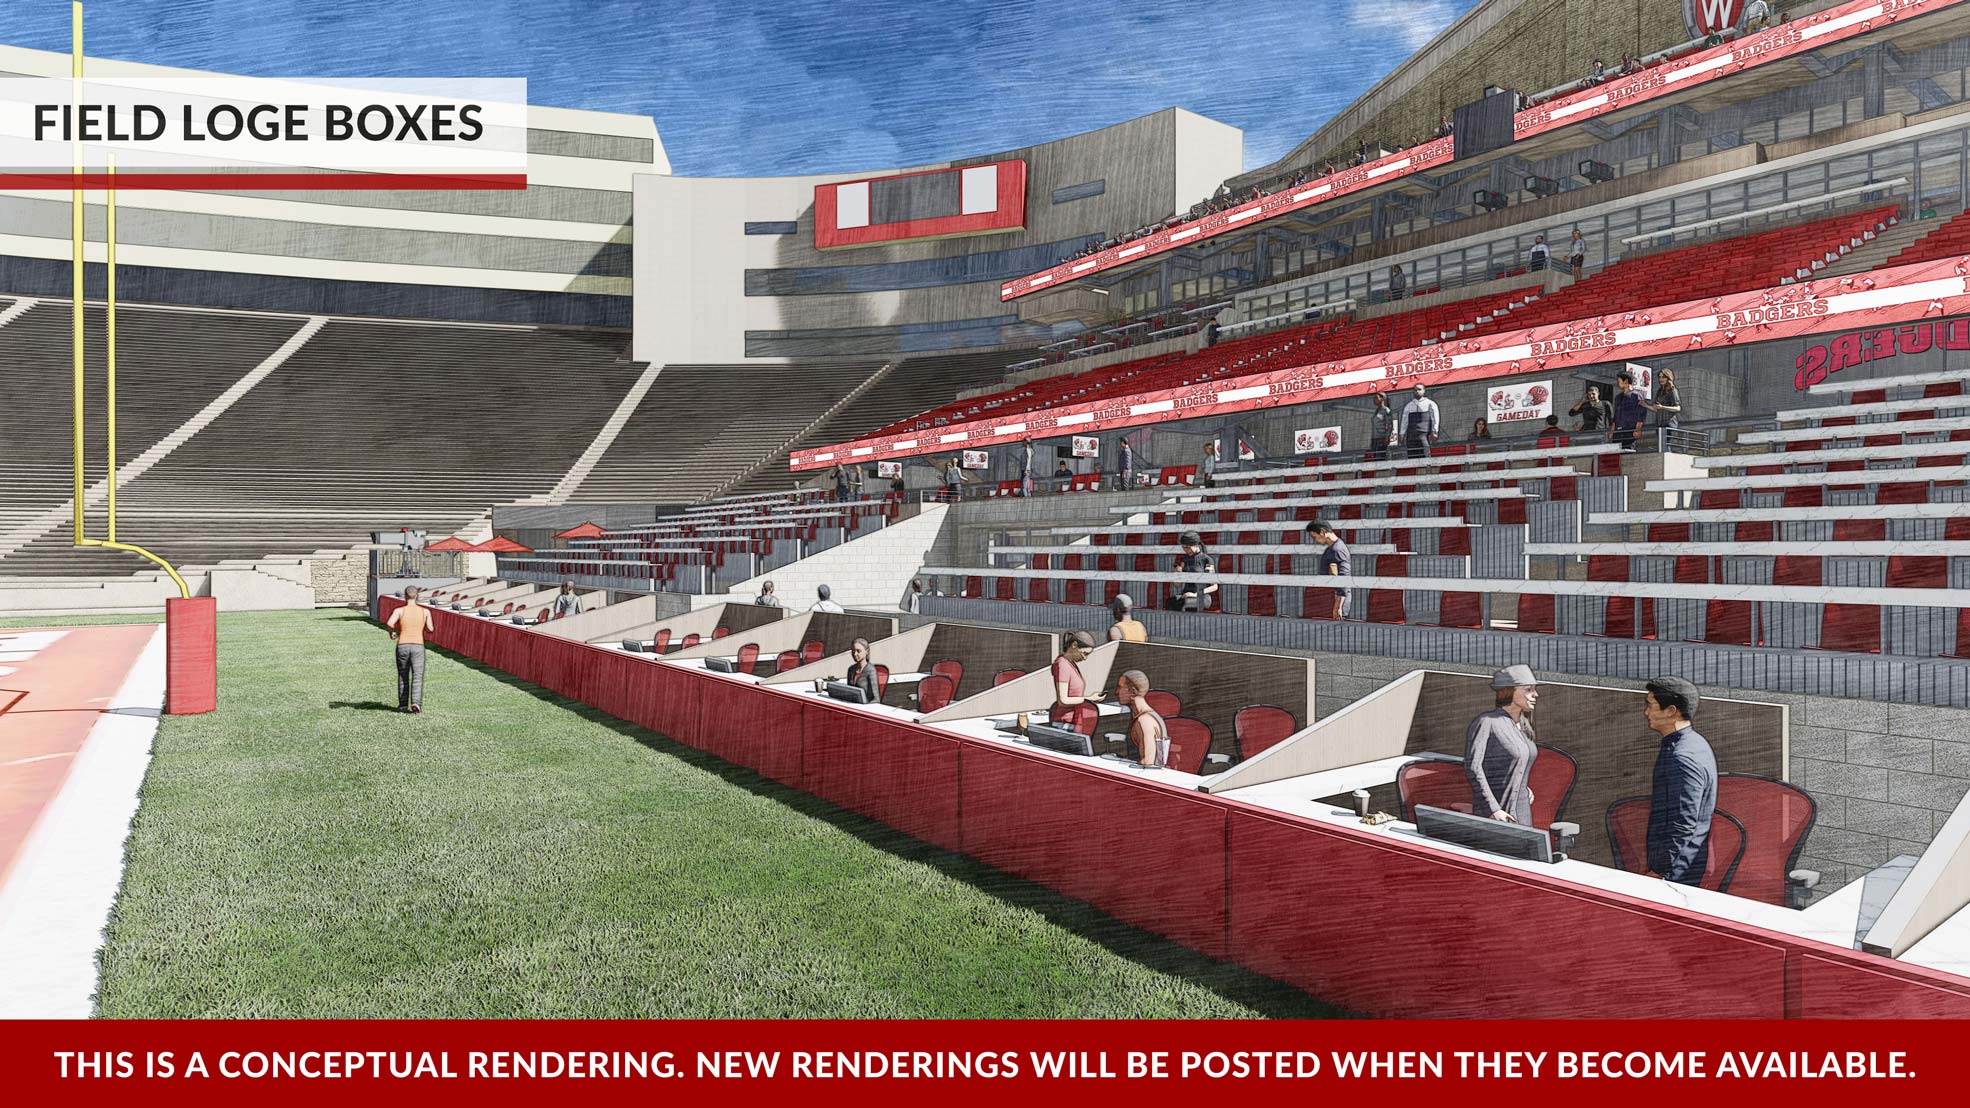 Camp Randall Stadium South End Zone Rendering From Field Level View Looking From The Corner Back to the Stands